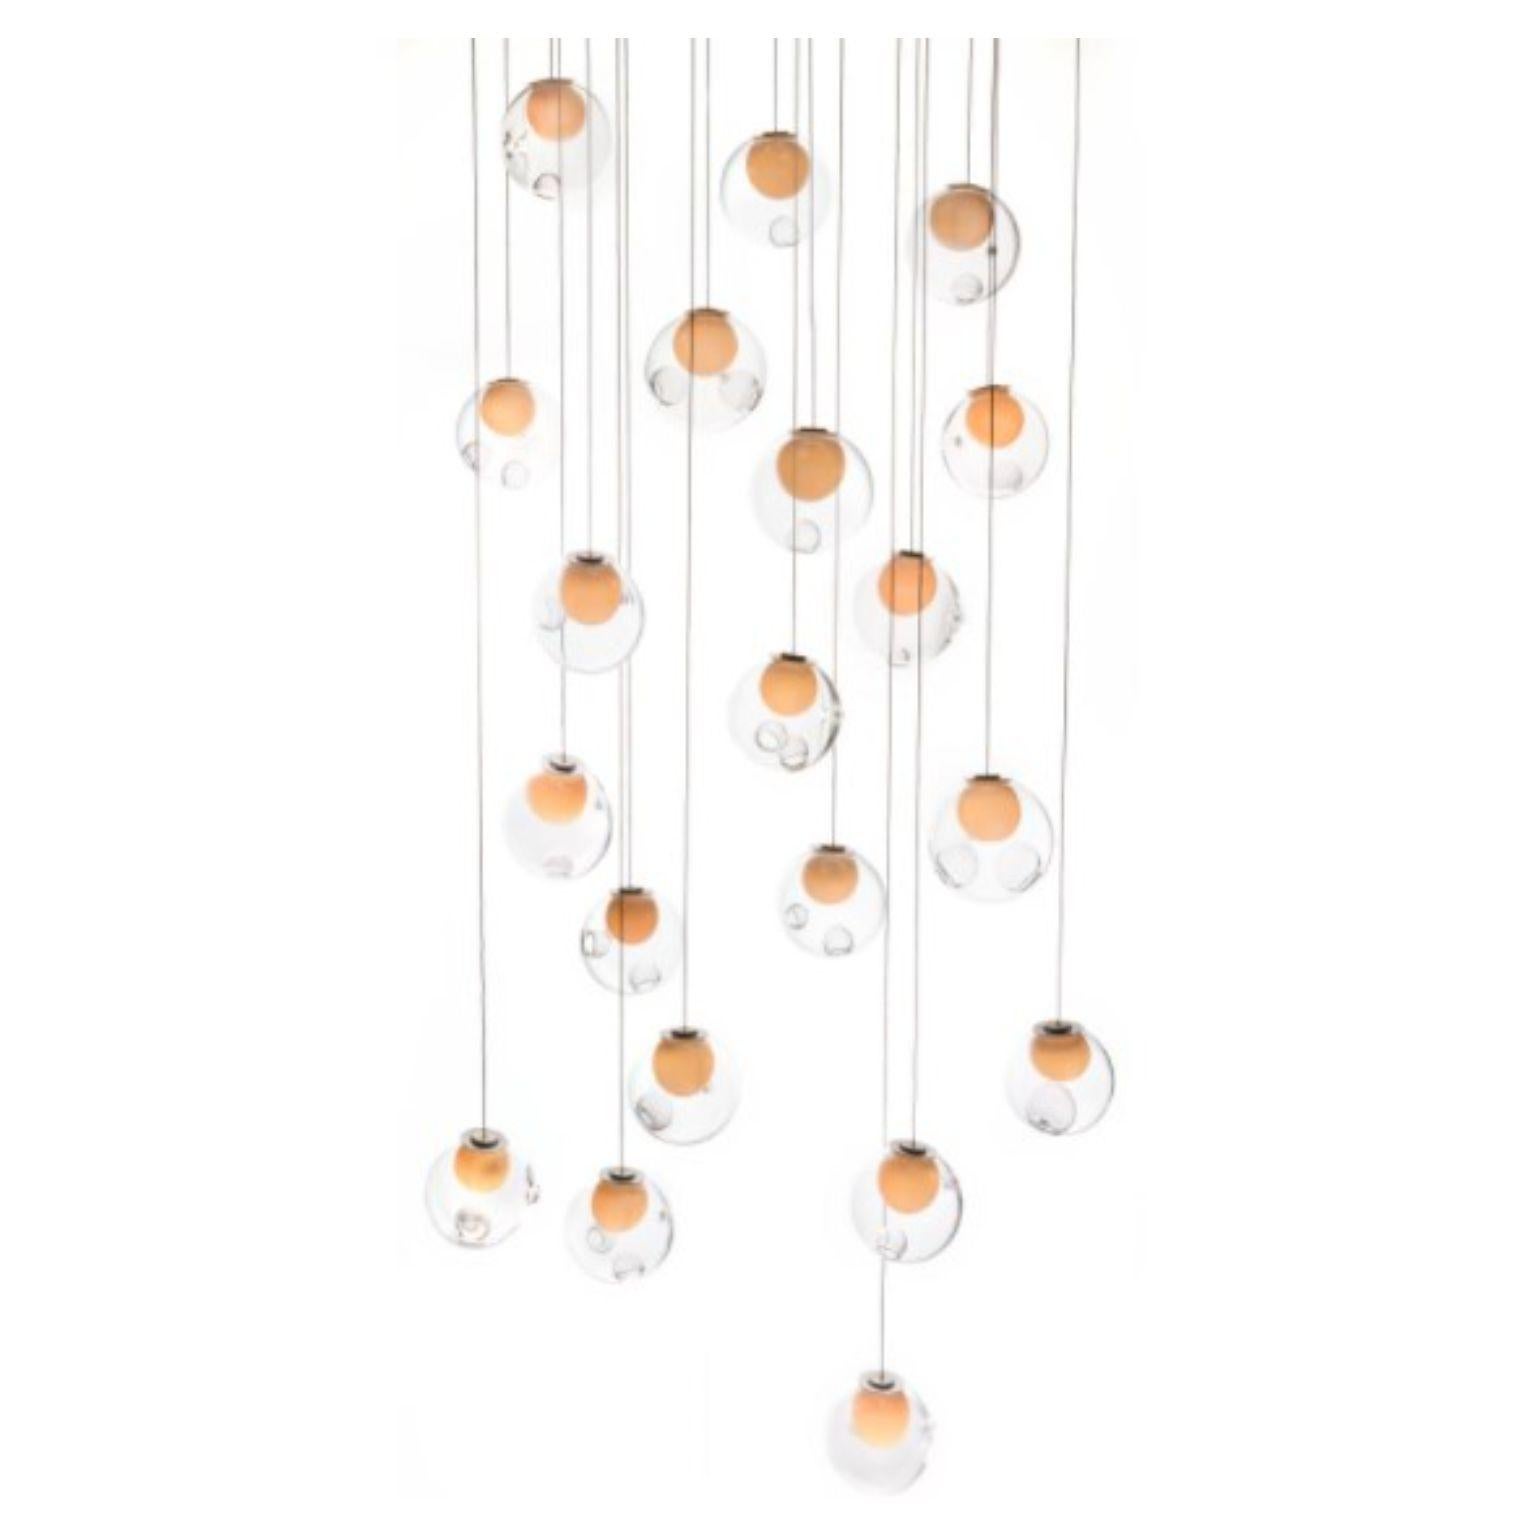 28.20 pendant by Bocci
Dimensions: D 75.5 x H 300 cm
Materials: diameter brushed nickel canopy
Weight: 52 kg
Also available in different dimensions.

All our lamps can be wired according to each country. If sold to the USA it will be wired for